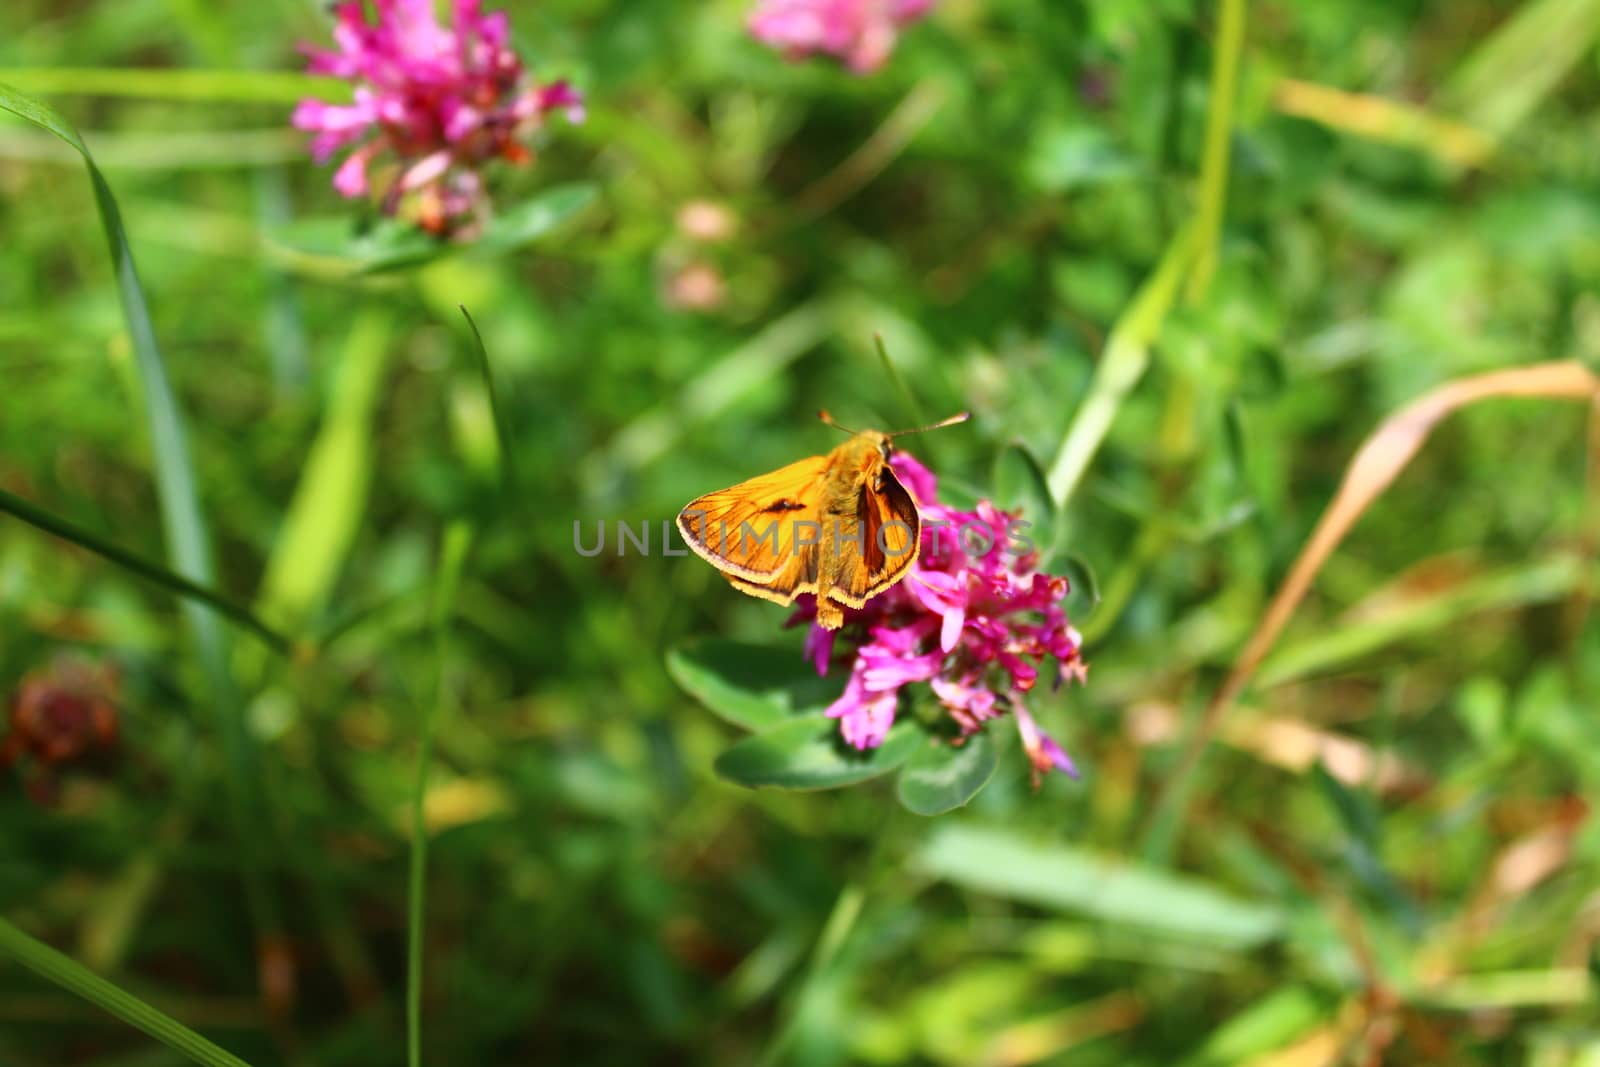 The picture shows a small skipper on a flower.